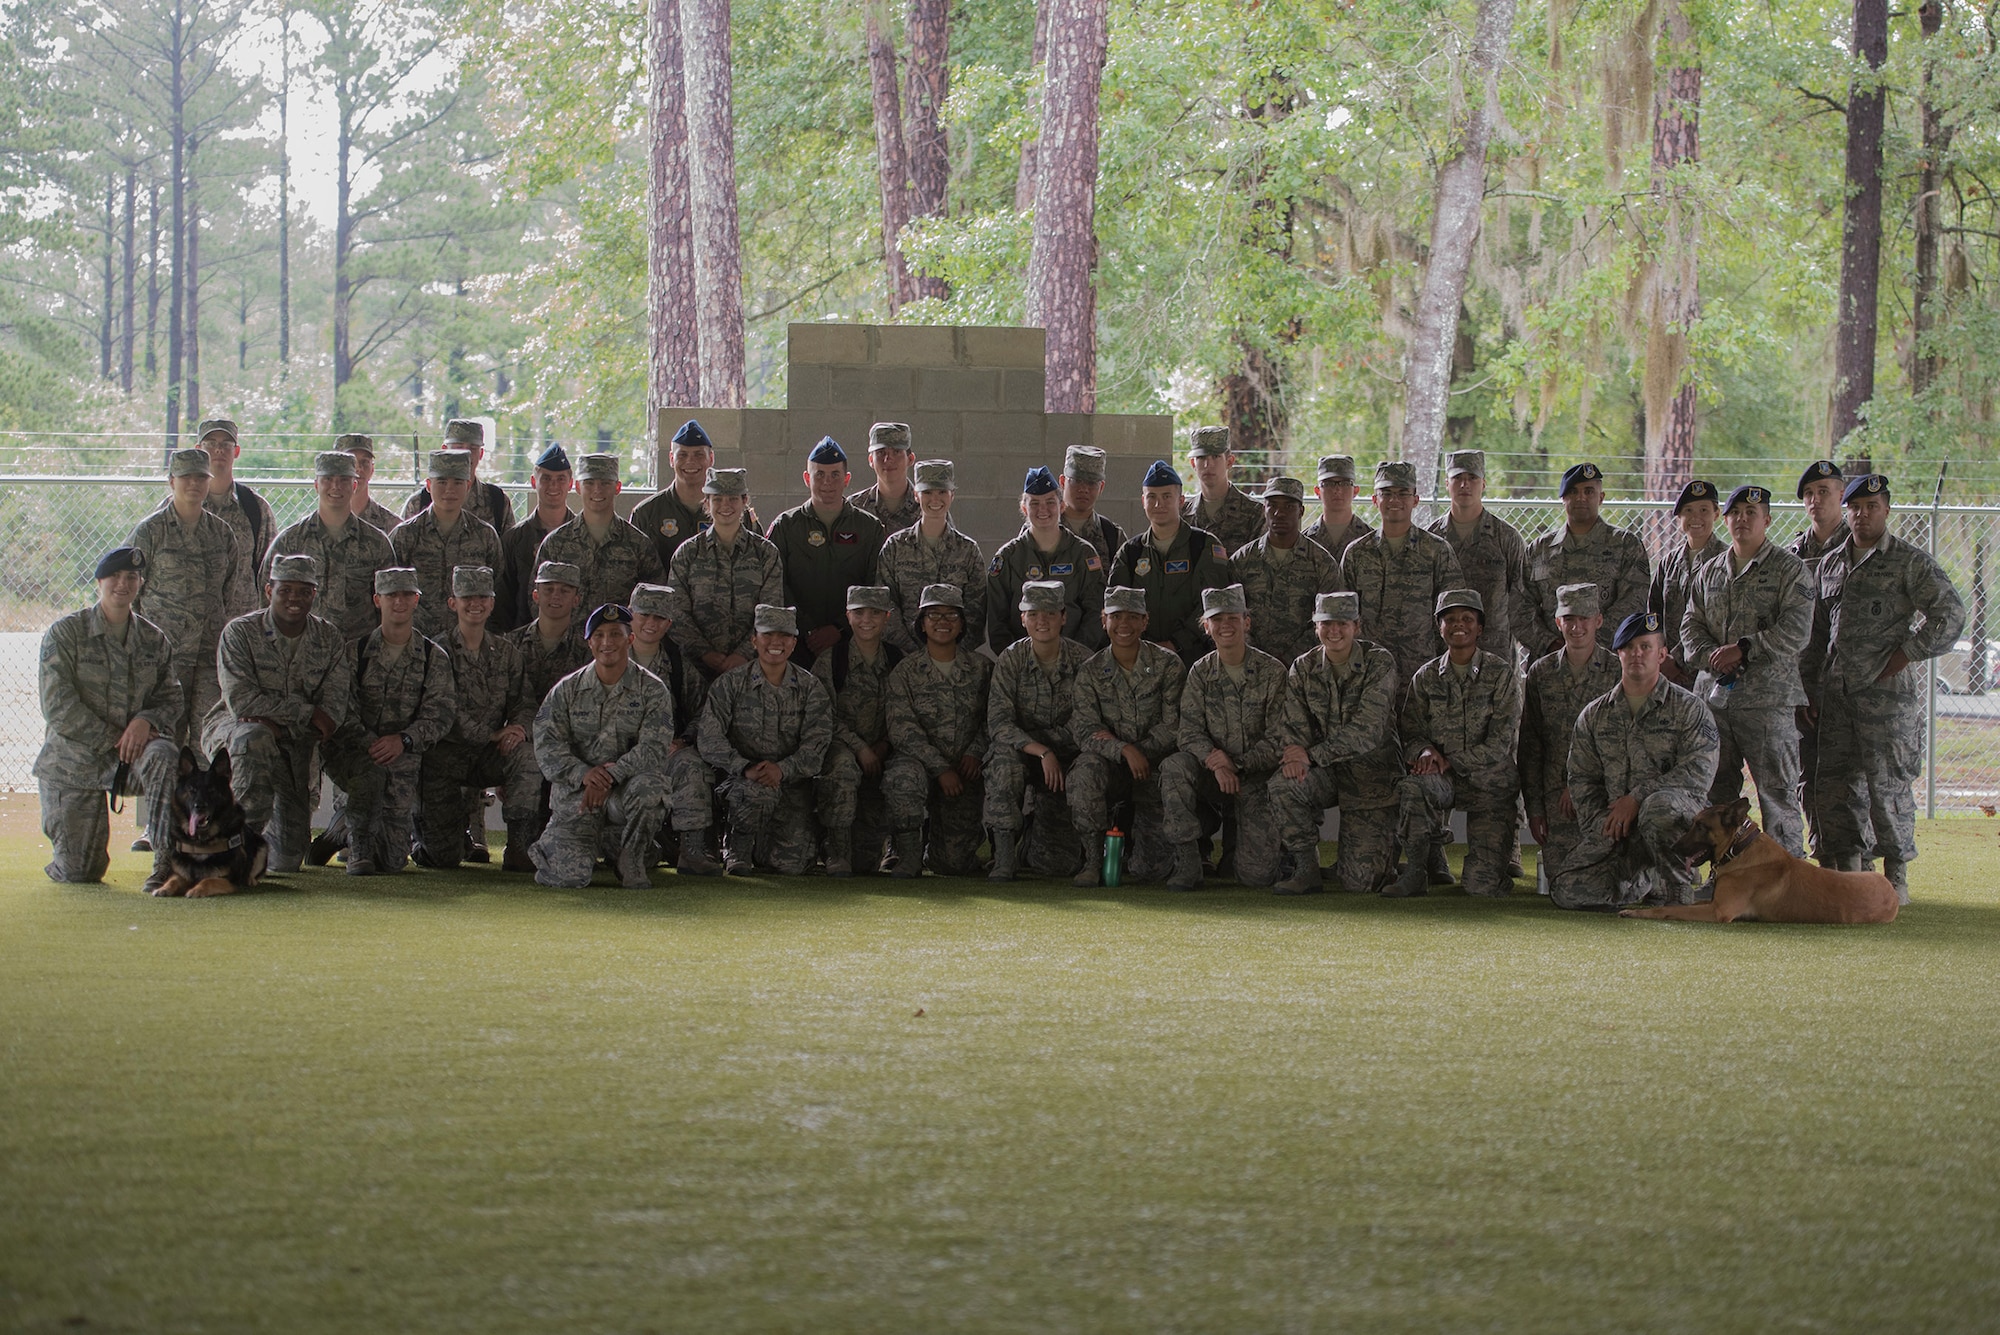 Air Force Reserve Officers’ Training Corps cadets from across the nation pose with members of the 23d Security Forces Squadron during Operation Air Force 2017, June 14, 2017, at Moody Air Force Base, Ga. The annual event is designed to give cadets a hands-on training experience and a glance at various mission assets at bases across the world. The program allows cadets to confirm or reassess their pursued career fields while learning different support functions to become better leaders of Airmen in the future. (U.S. Air Force photo by Senior Airman Greg Nash) 